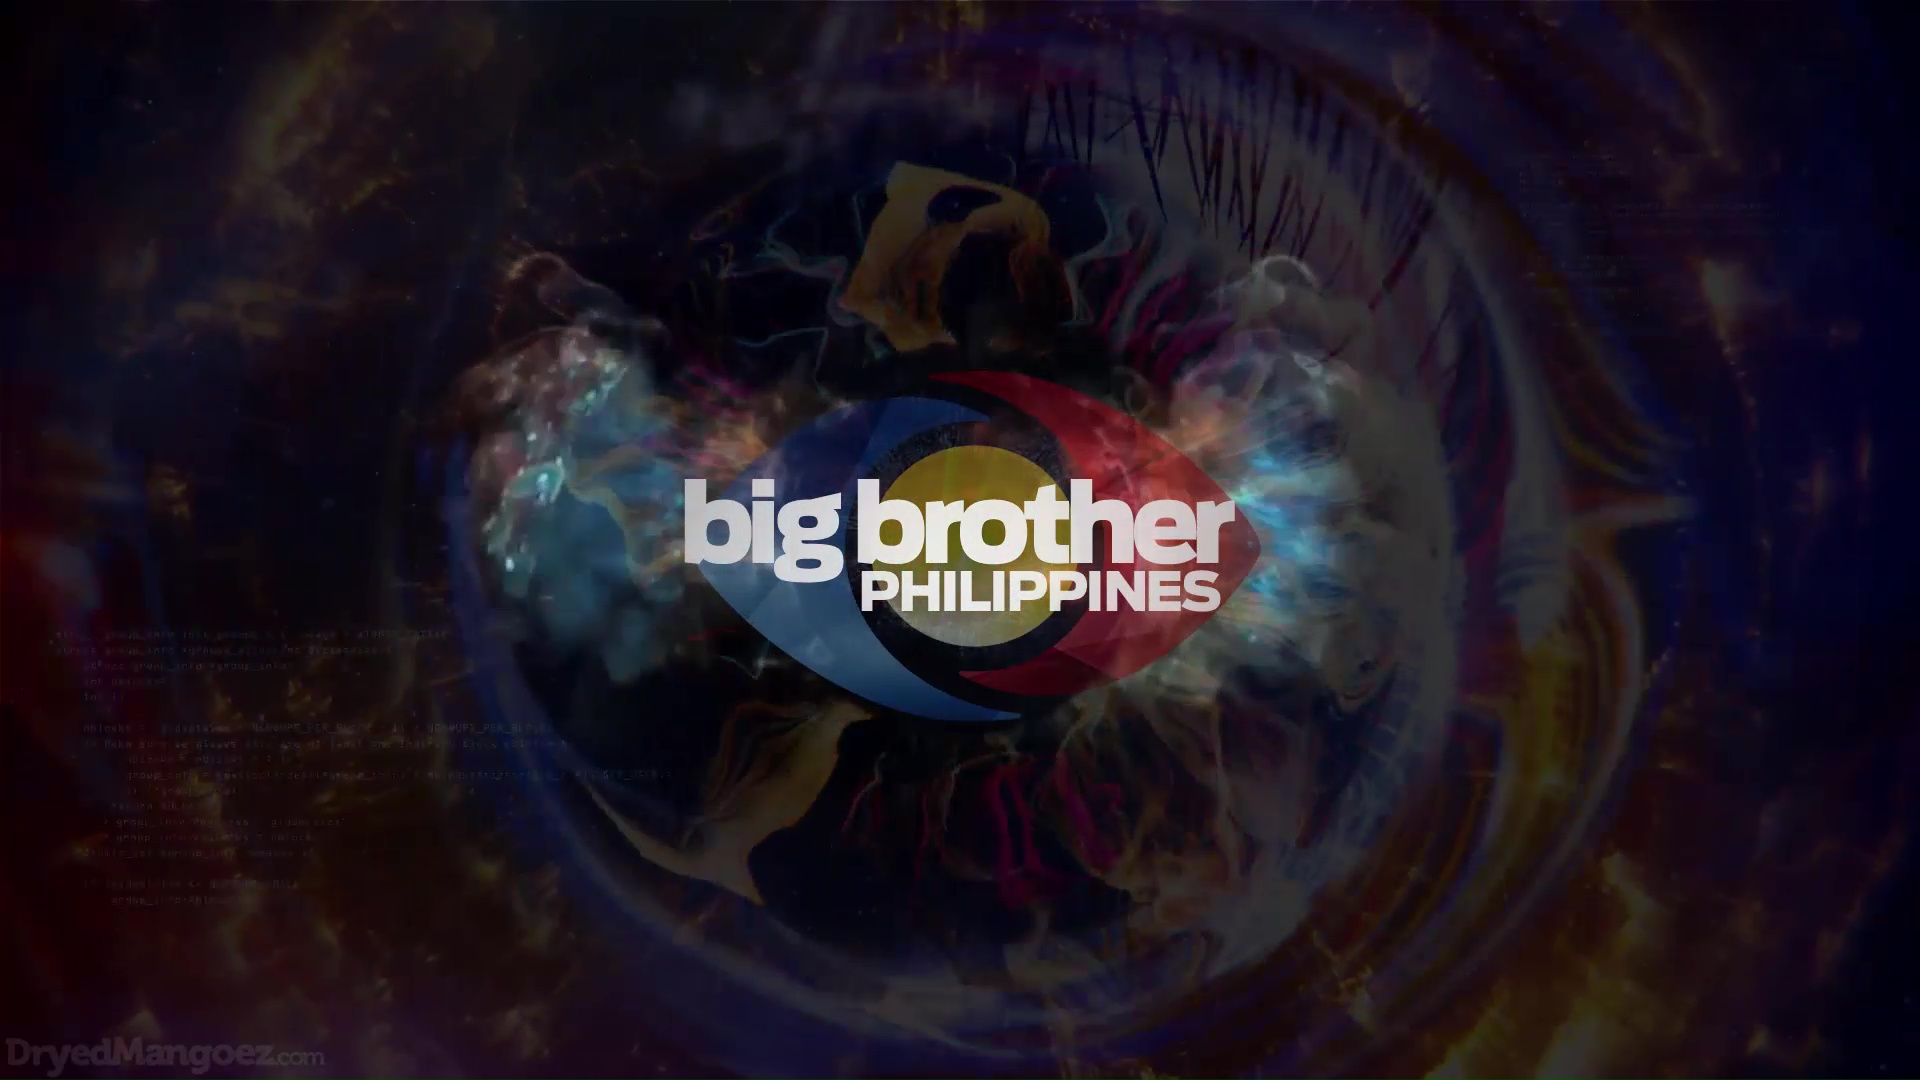 Big Brother Philippines title card